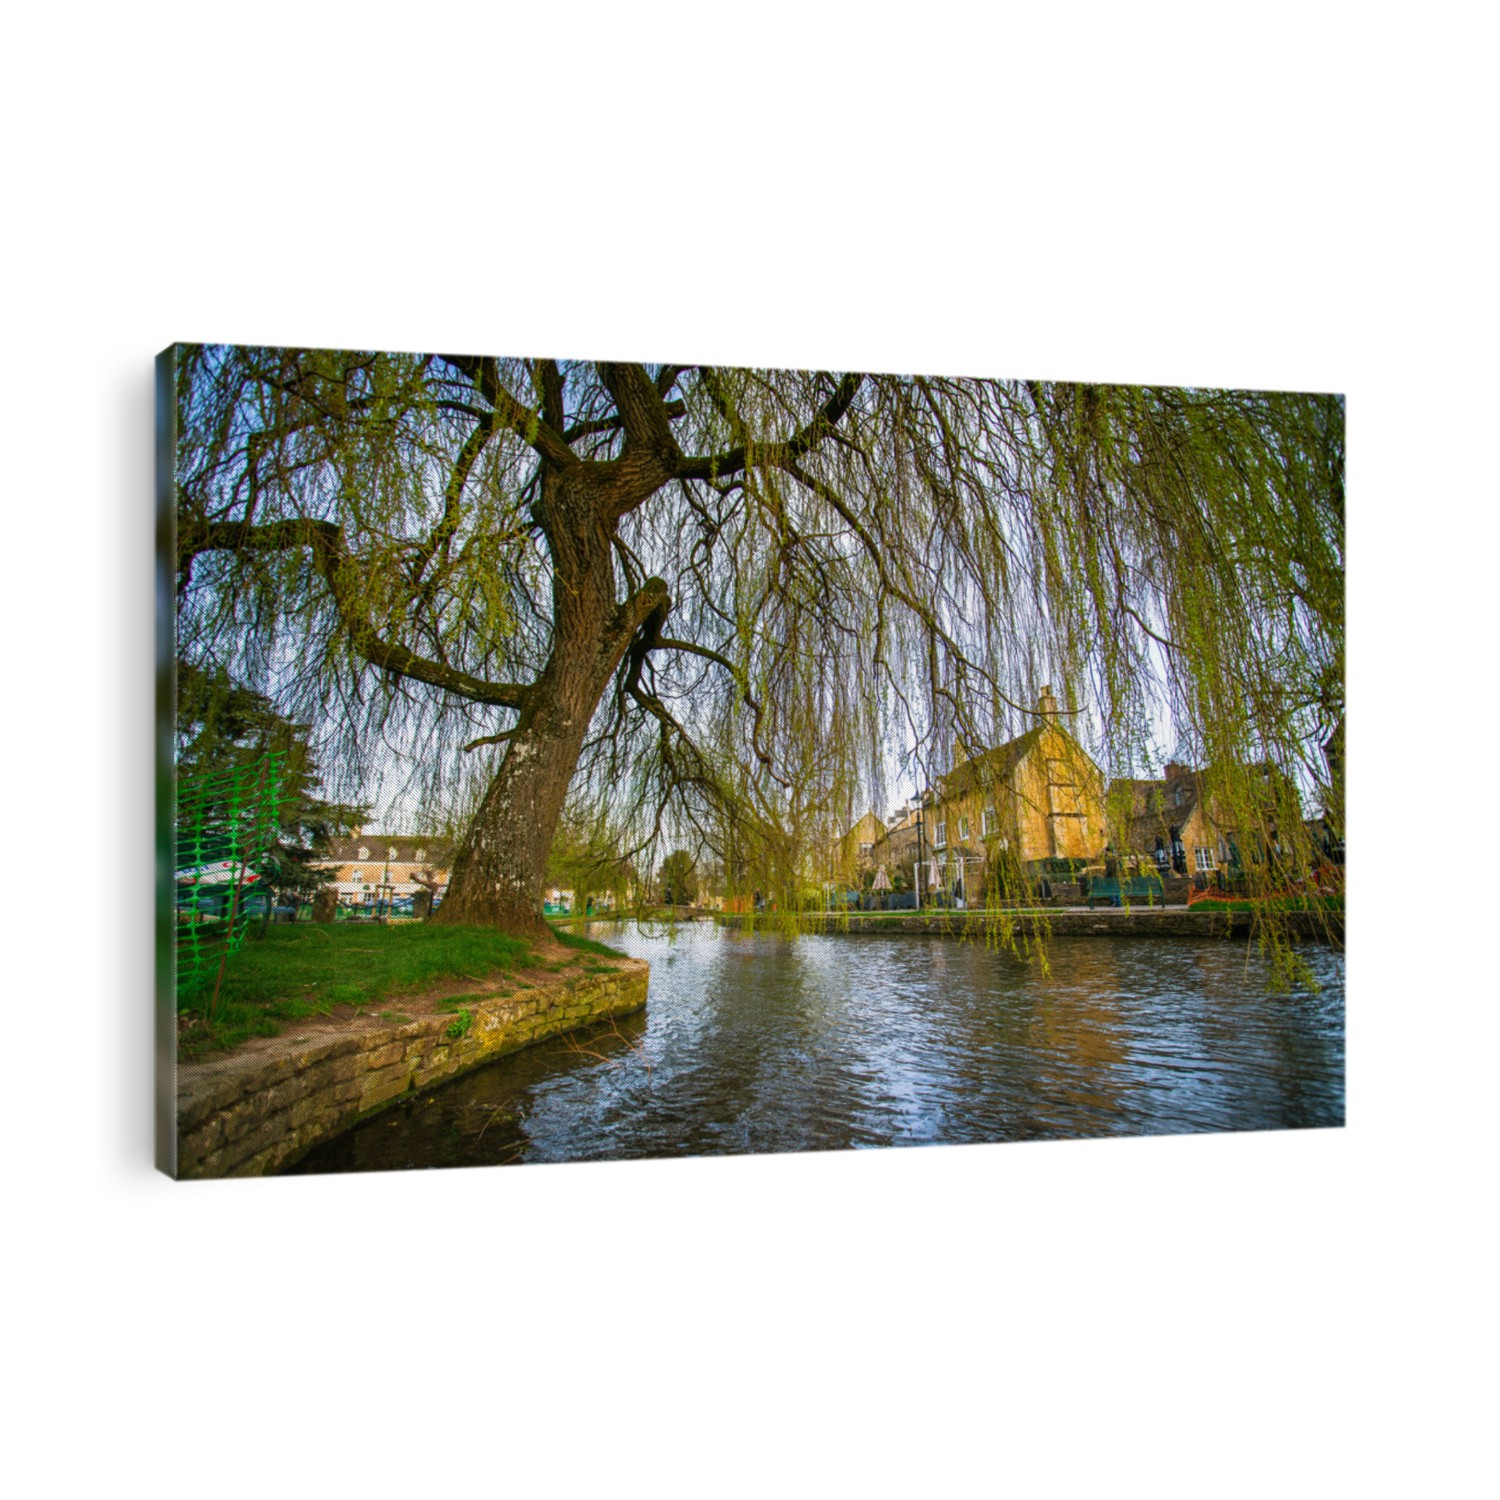 Bourton on the Water, a village and civil parish in Gloucestershire lies on a wide flat vale within the Cotswolds Area of Outstanding Natural Beauty (AONB), England, UK